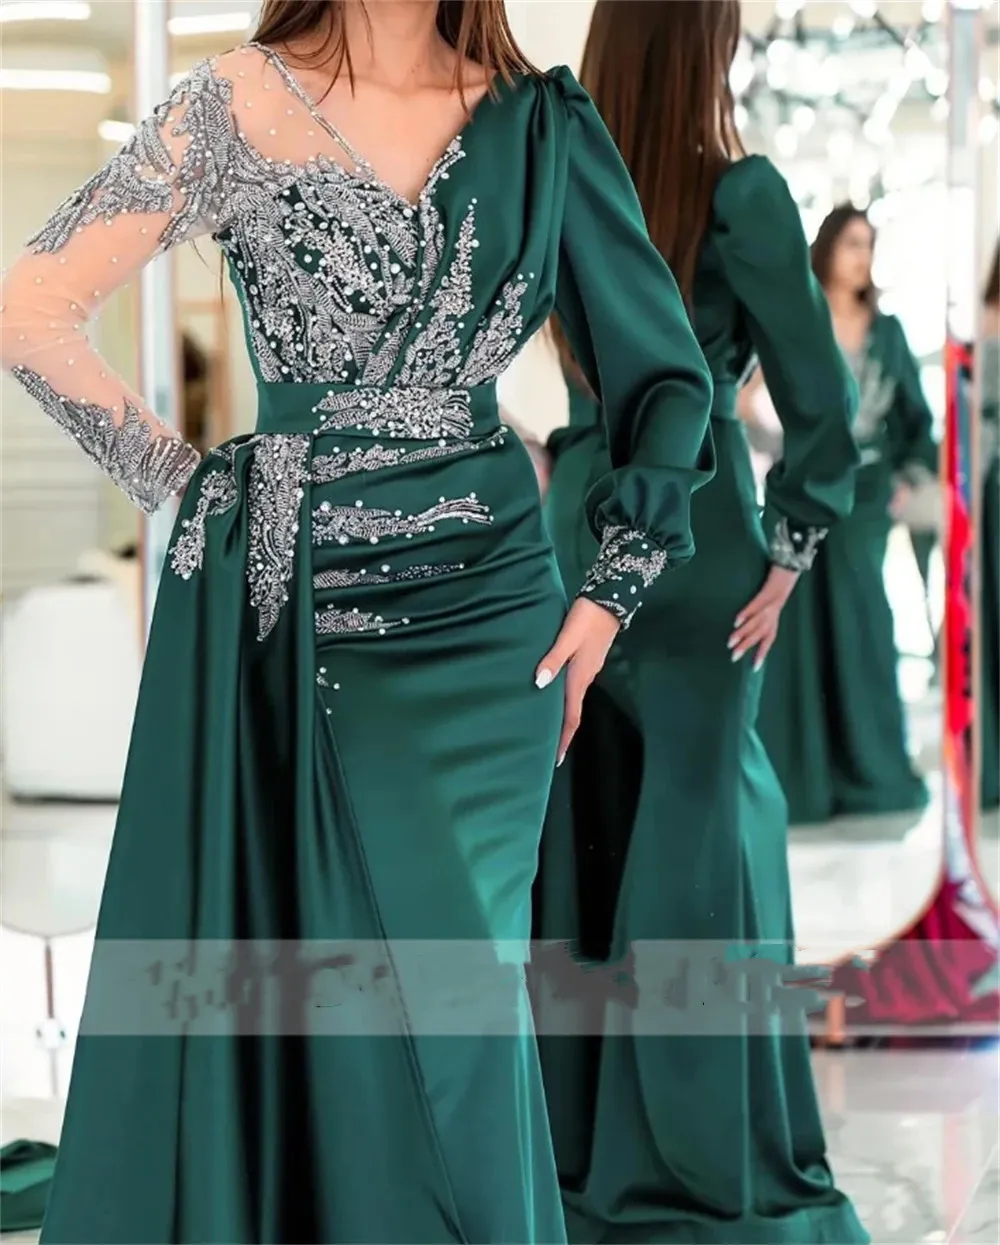 Emerald Green Satin Muslim Prom Dresses Sliver Beaded Appliques Puff Long Sleeve With Train V Neck Formal Birthday Gown